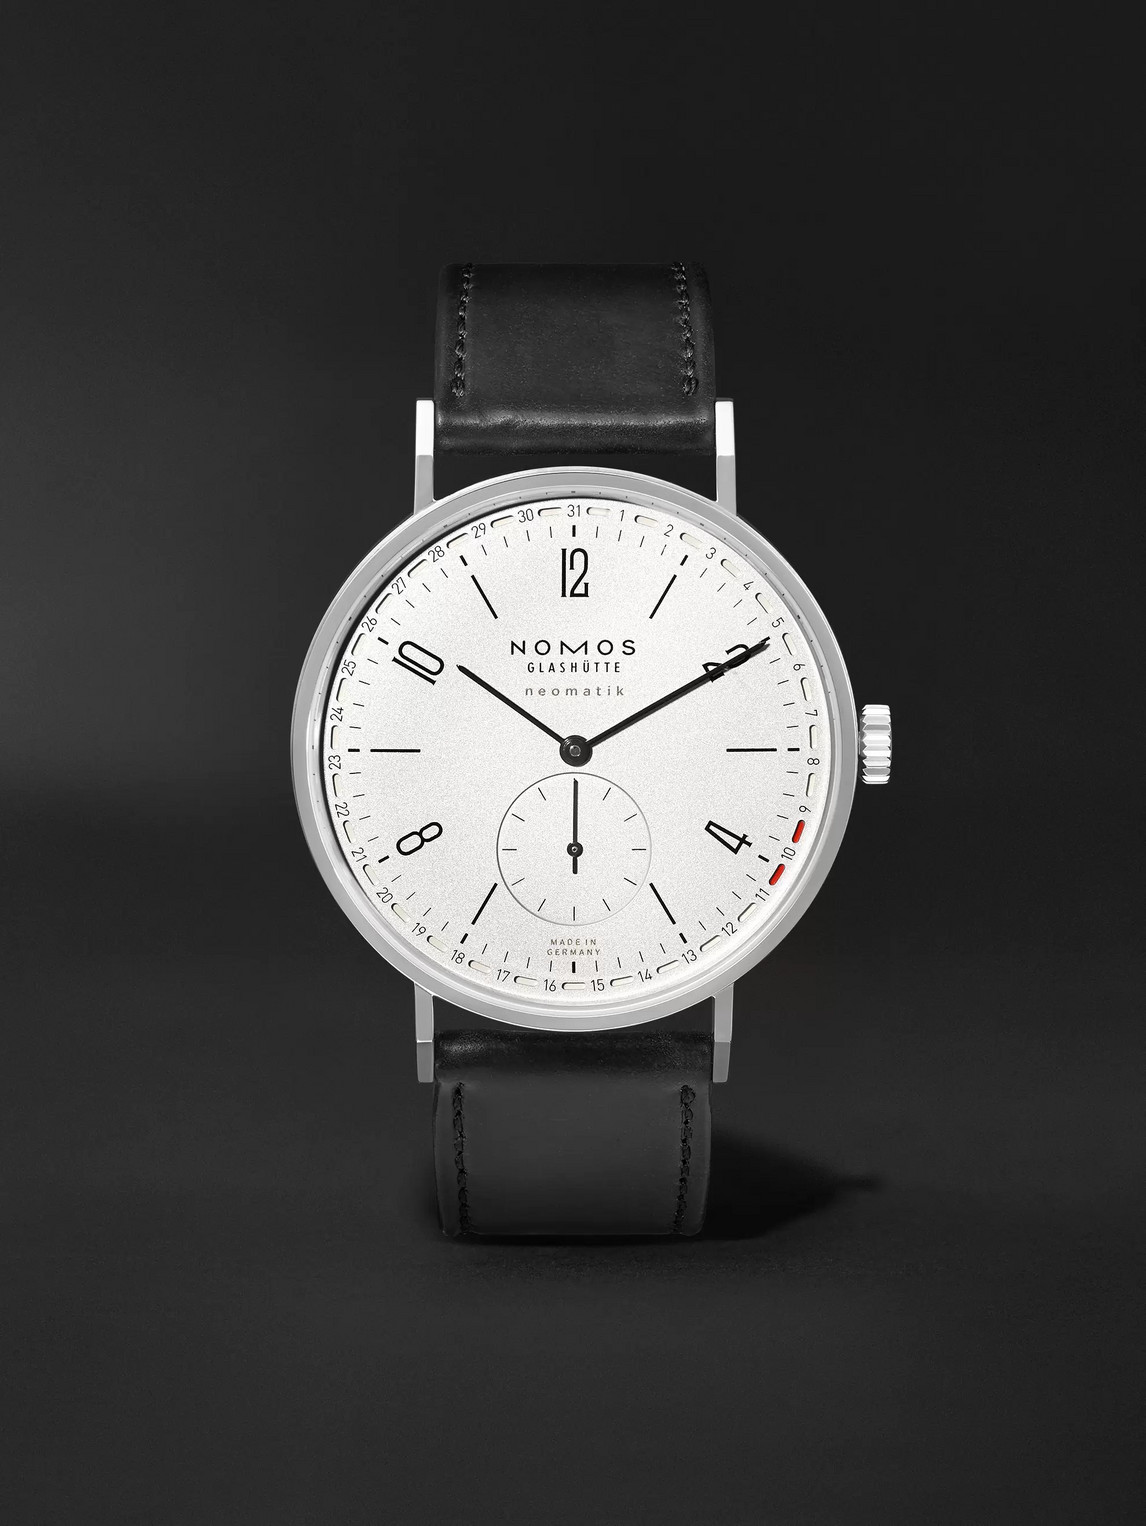 Nomos Glashütte Tangente Neomatik Automatic 41mm Stainless Steel And Leather Watch, Ref. No. 180 In White